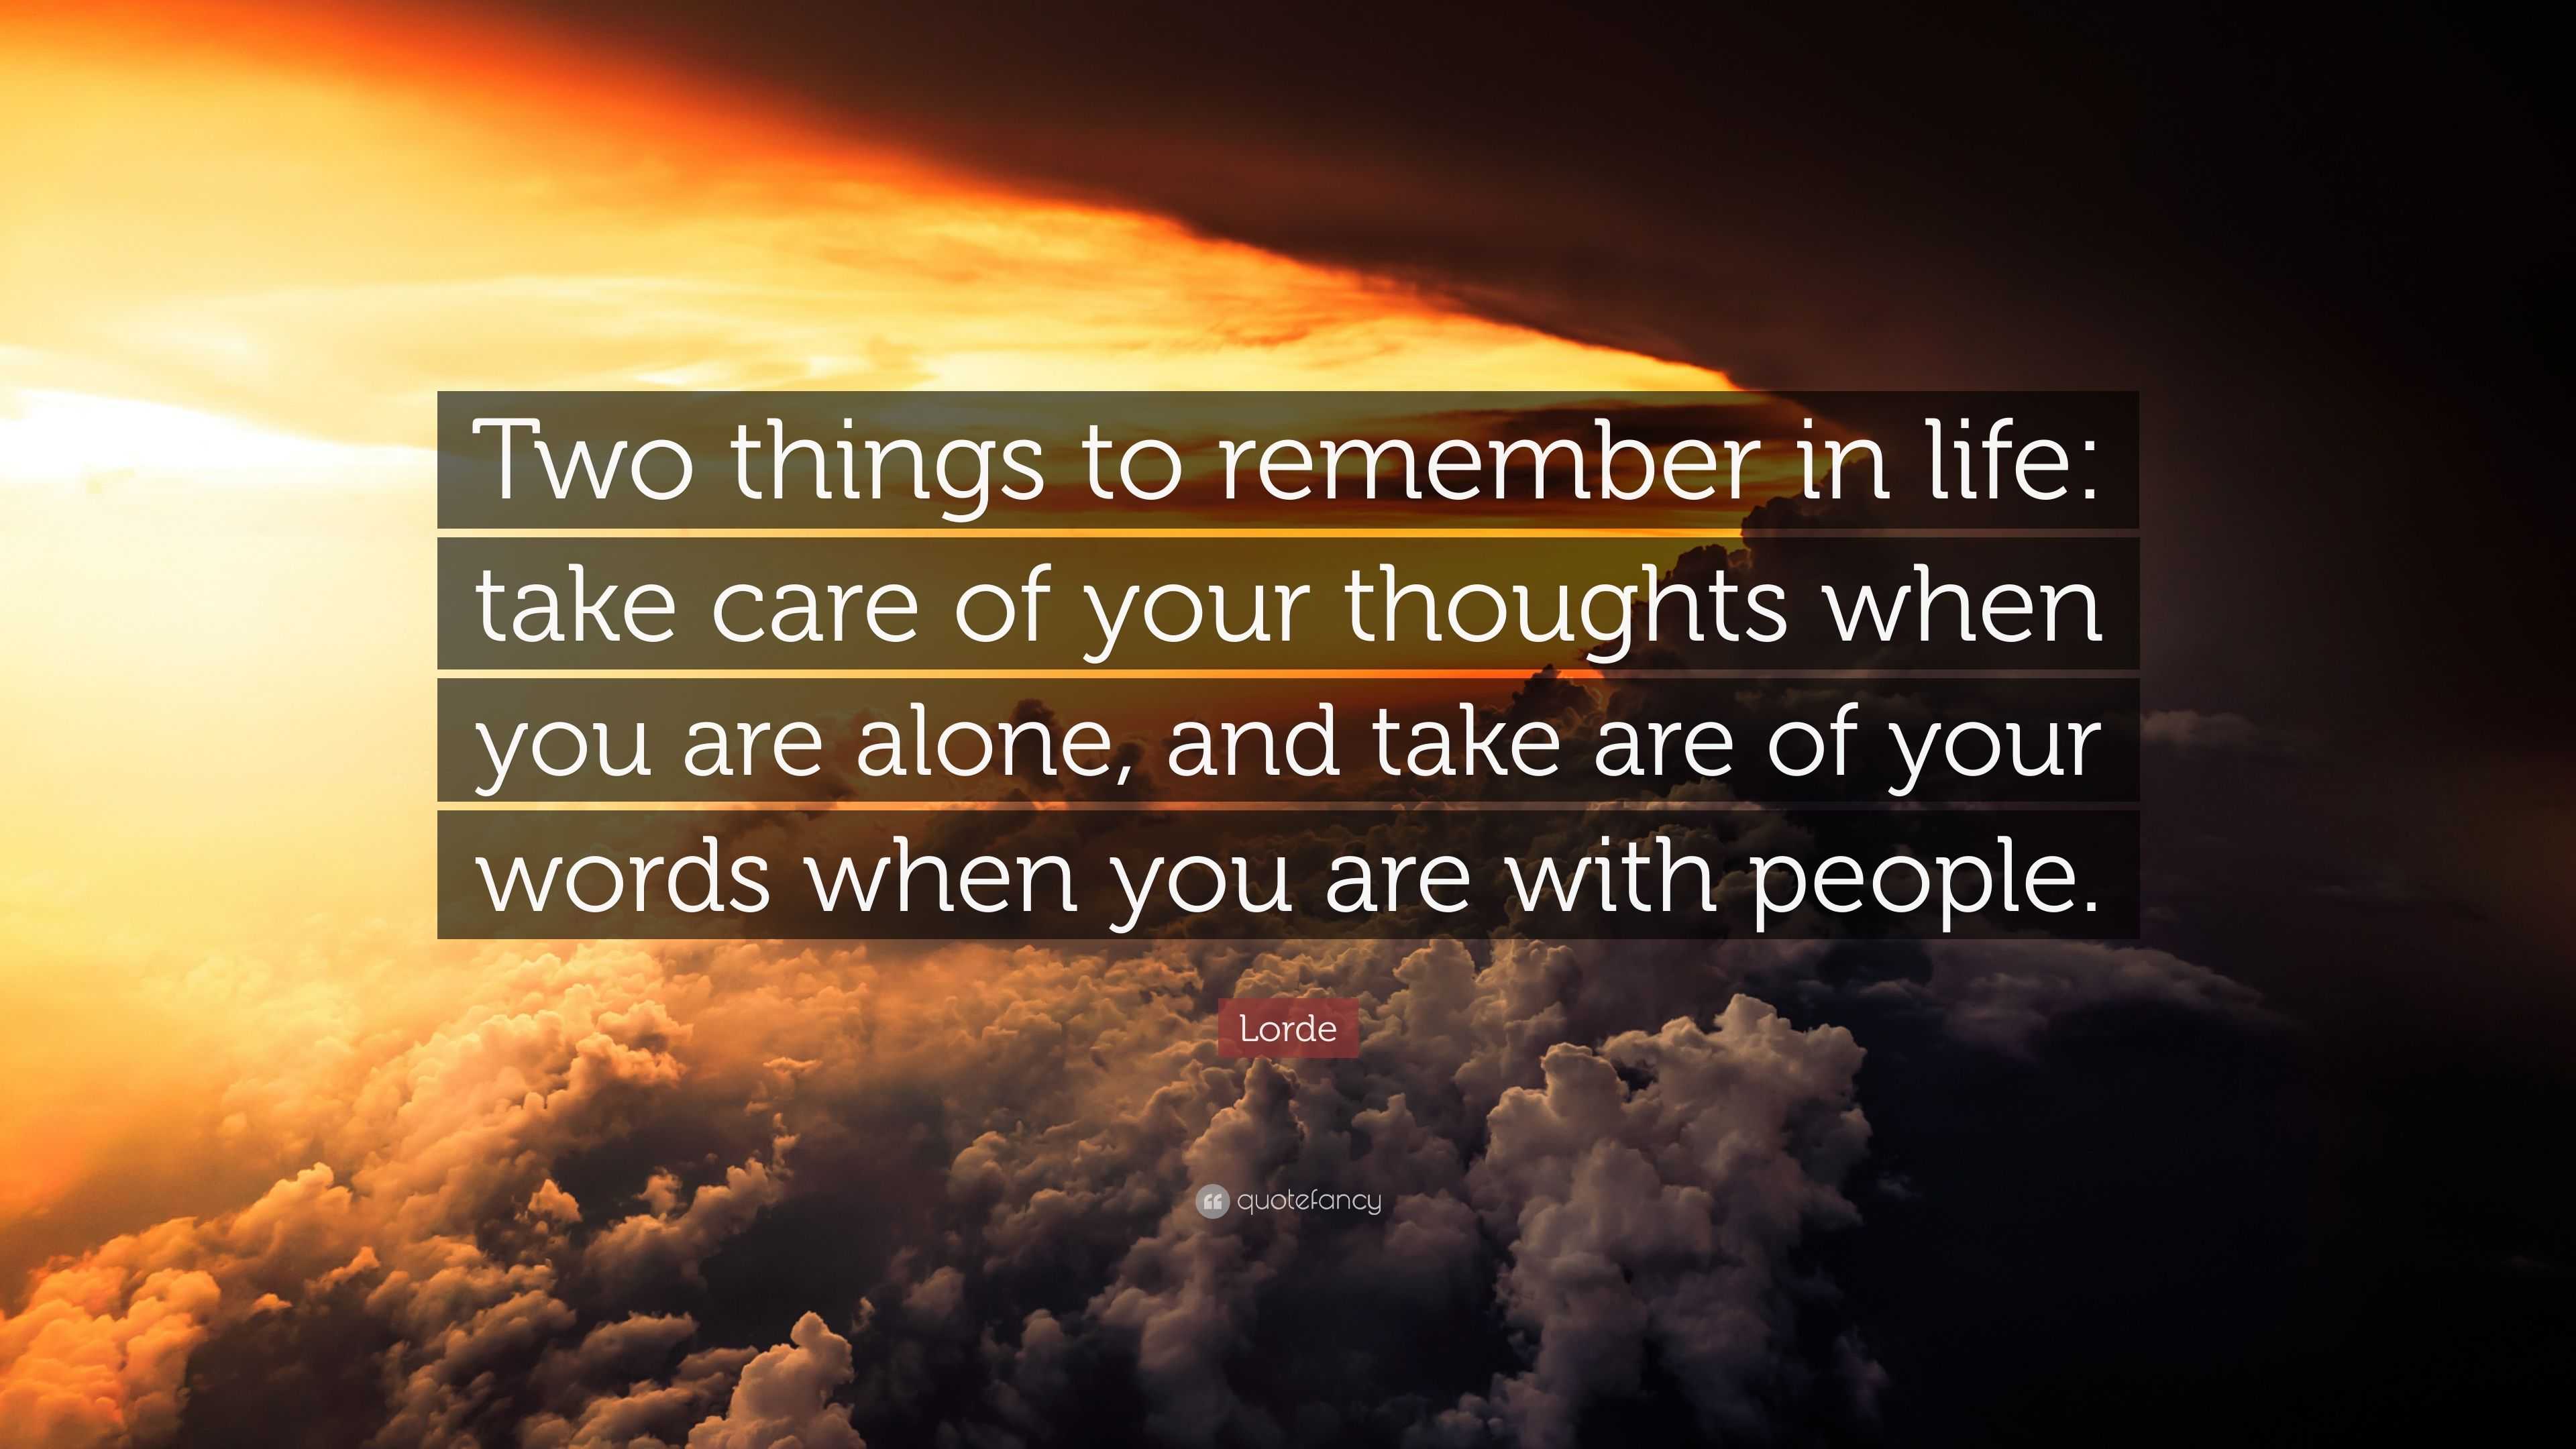 Lorde Quote: “Two things to remember in life: take care of your ...